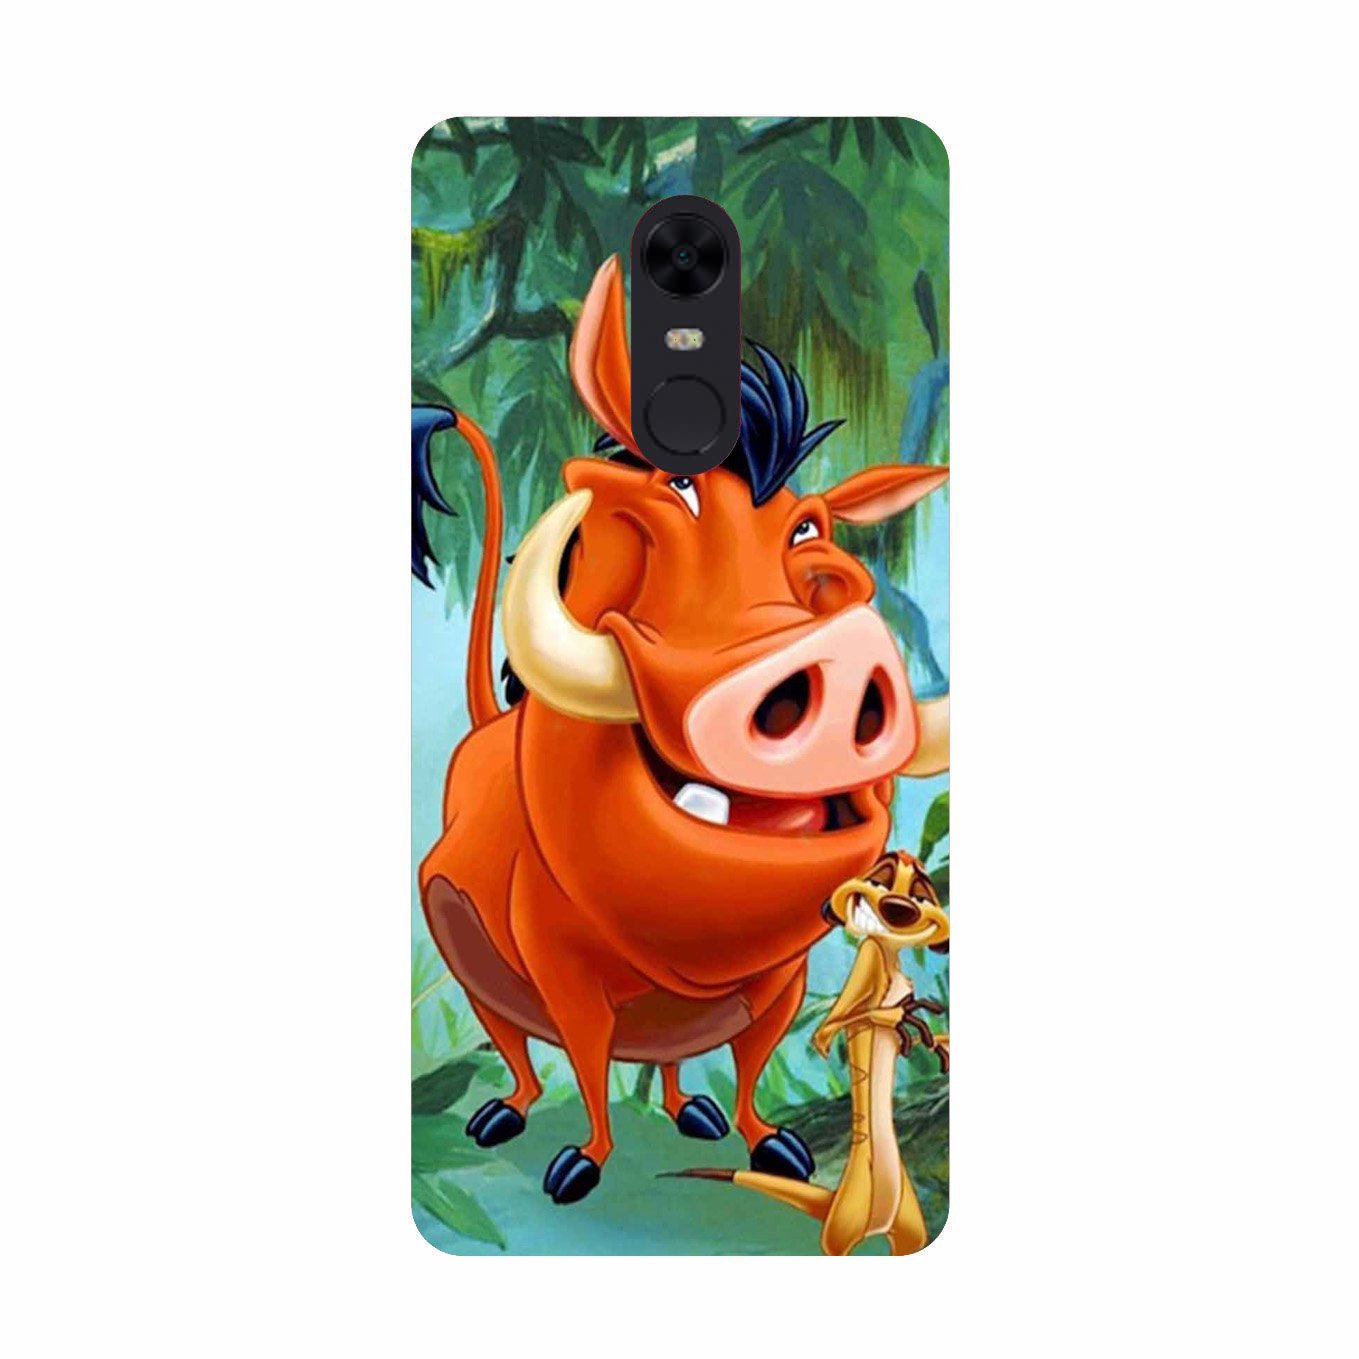 Timon and Pumbaa Mobile Back Case for Redmi Note 4(Design - 305)